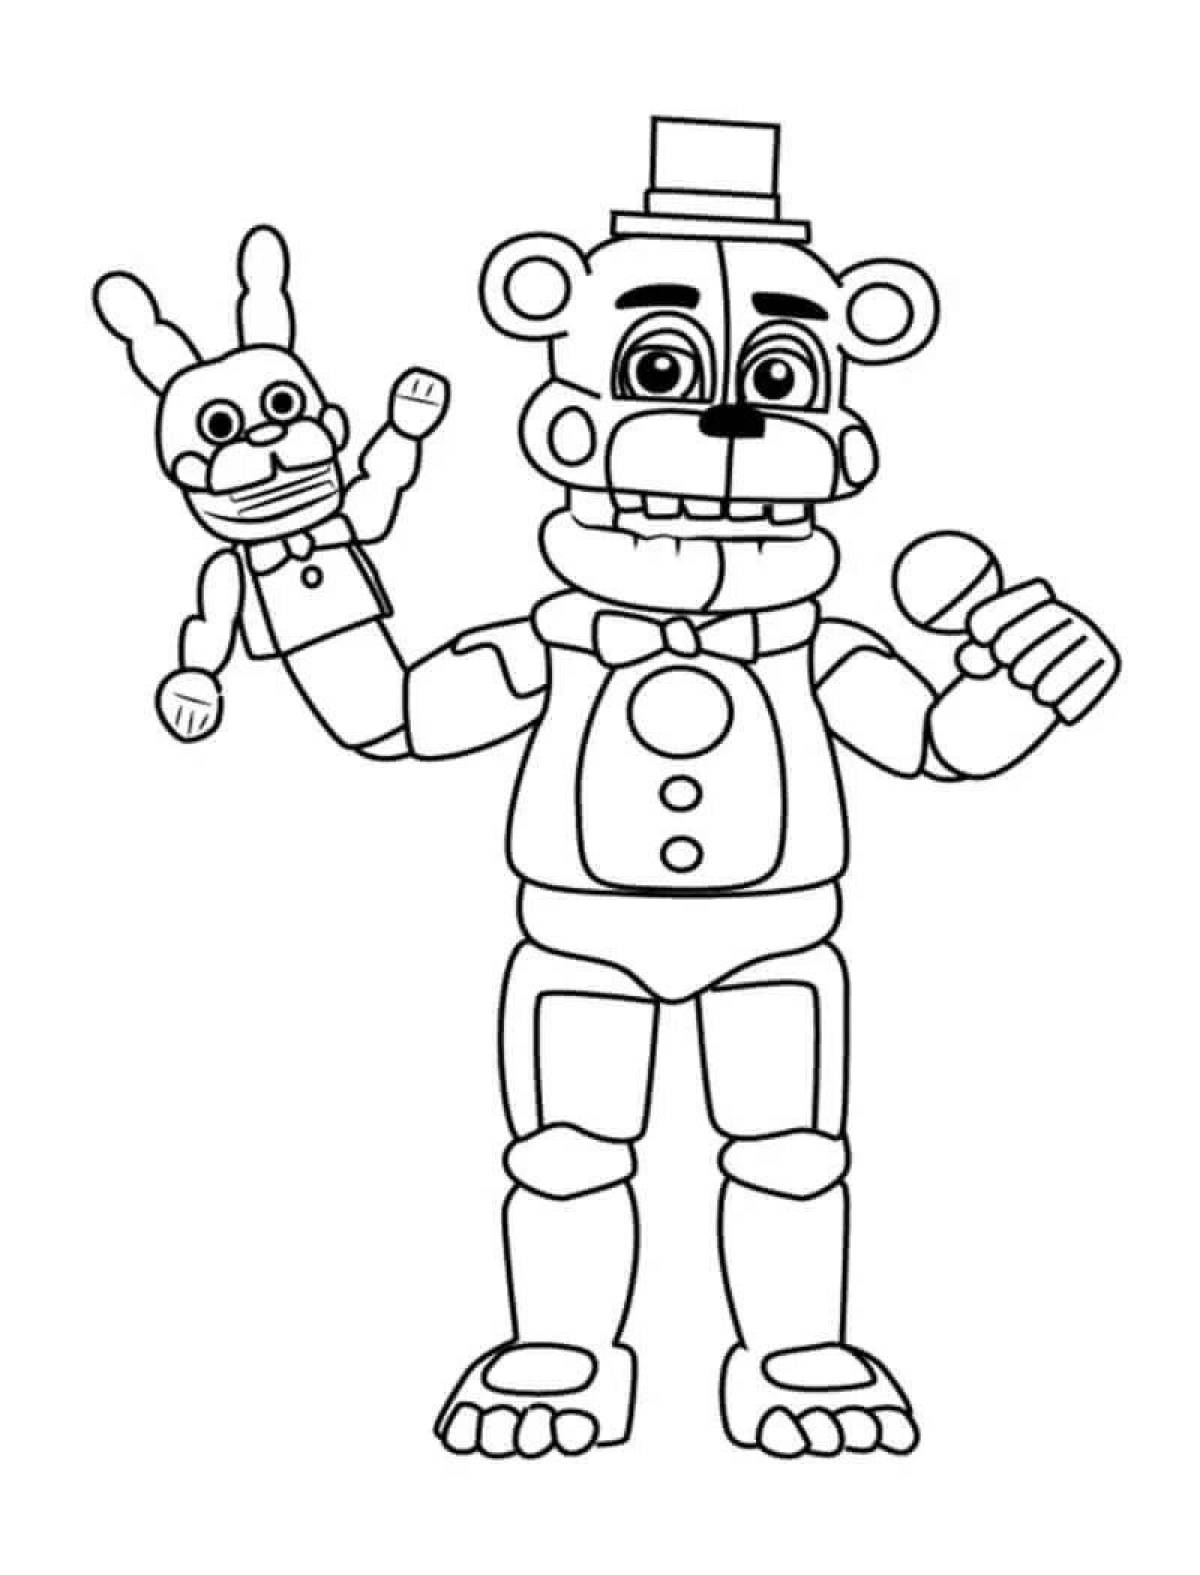 Amazing fnaf world coloring page